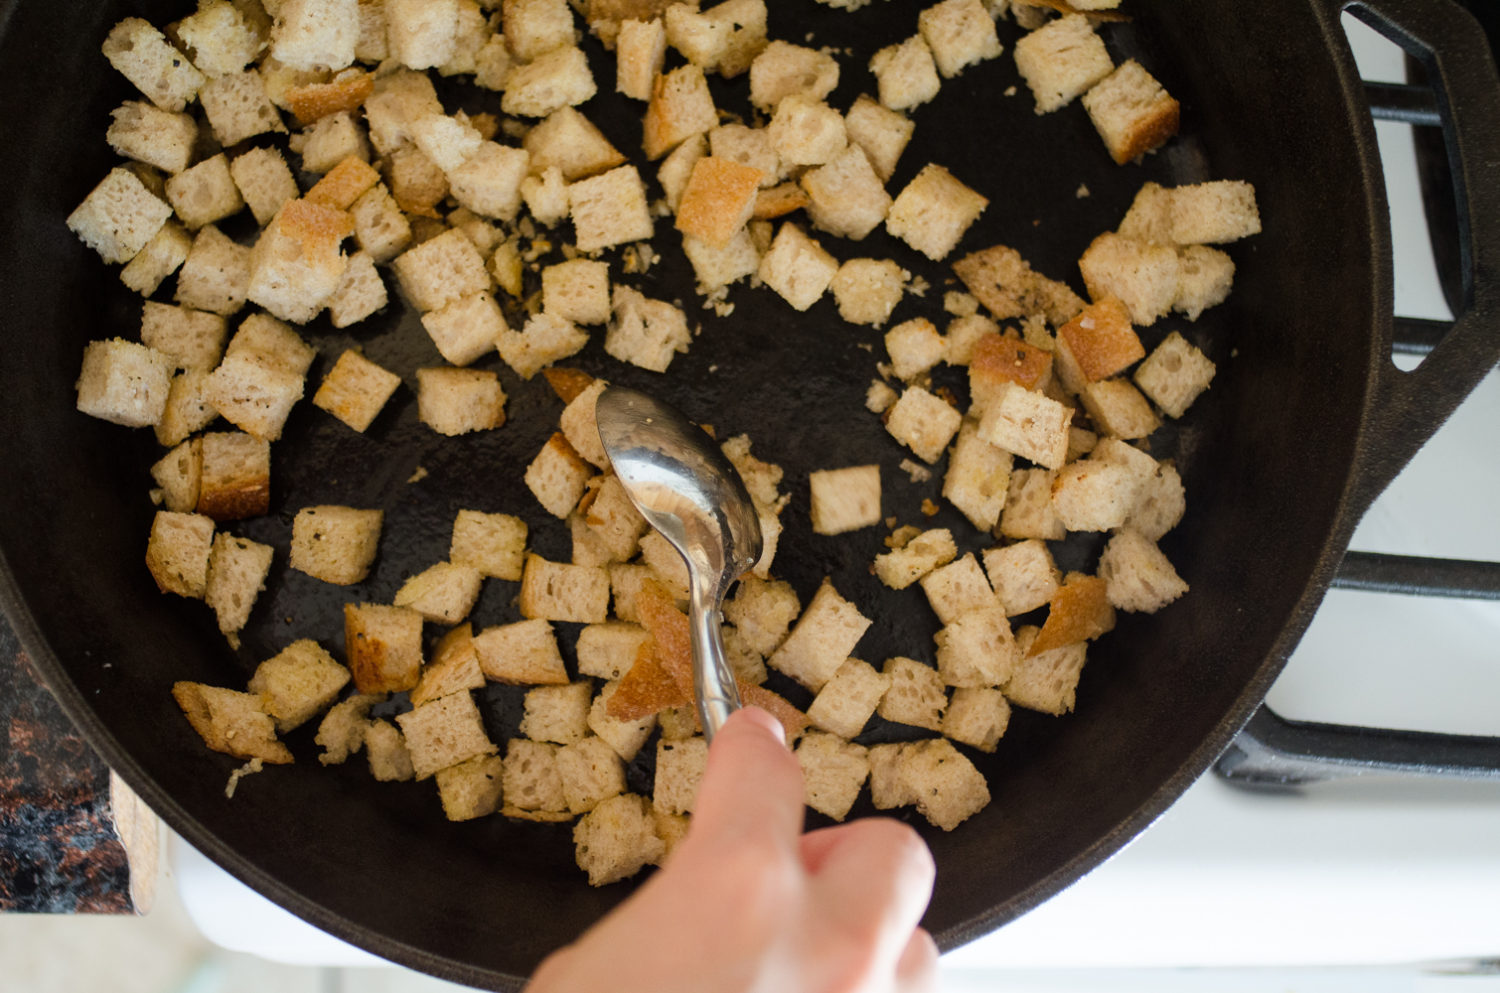 How to Make Croutons Over the Stove